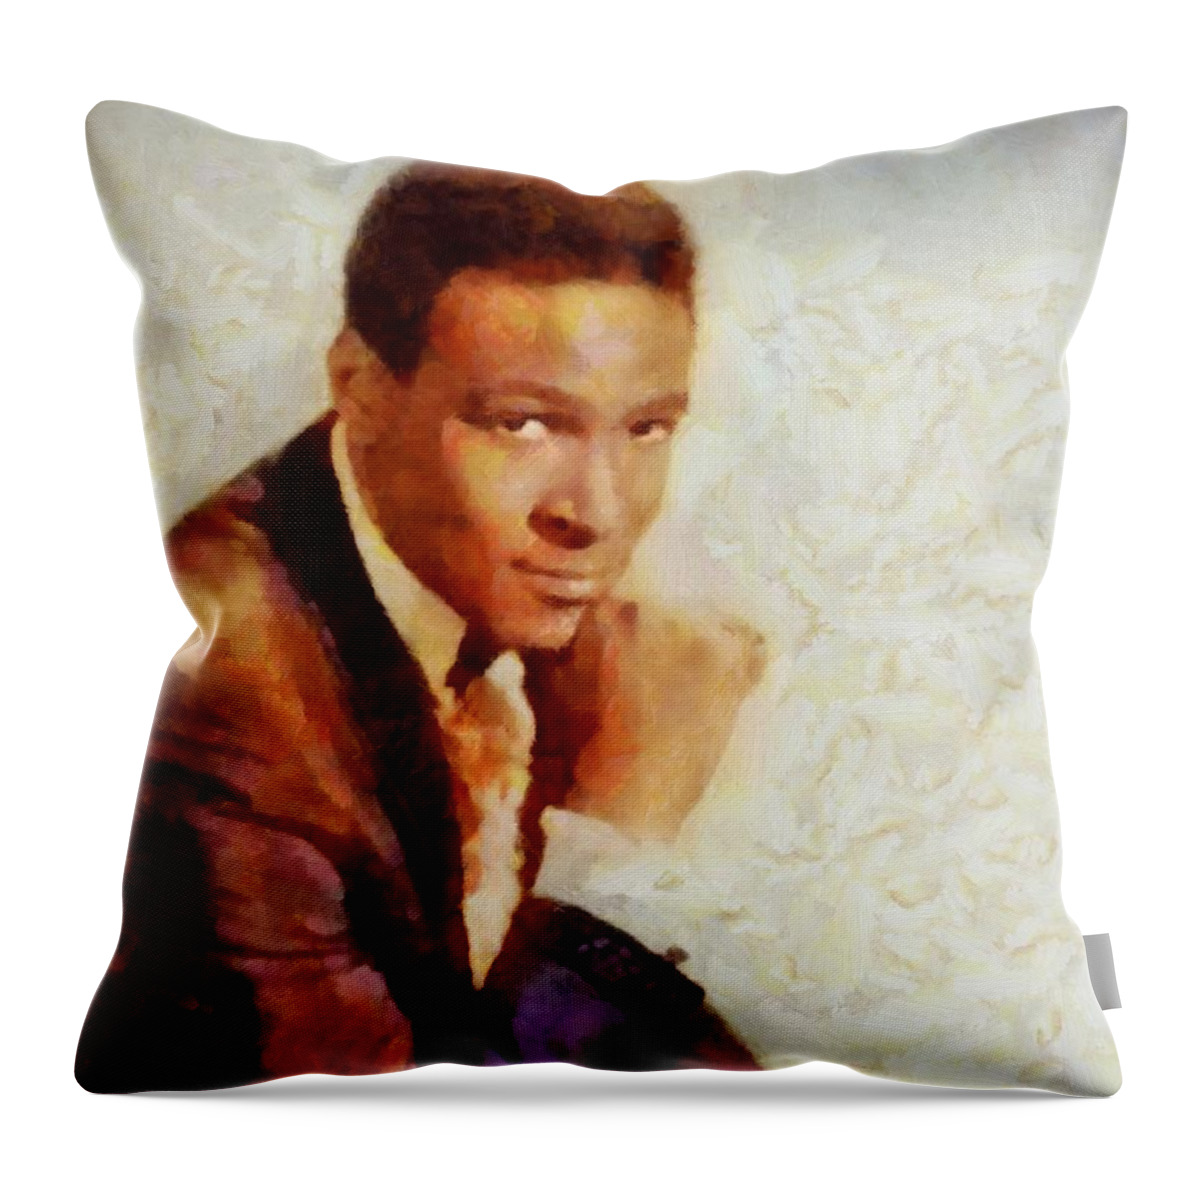 Hollywood Throw Pillow featuring the painting Marvin Gaye, Music Legend by Esoterica Art Agency